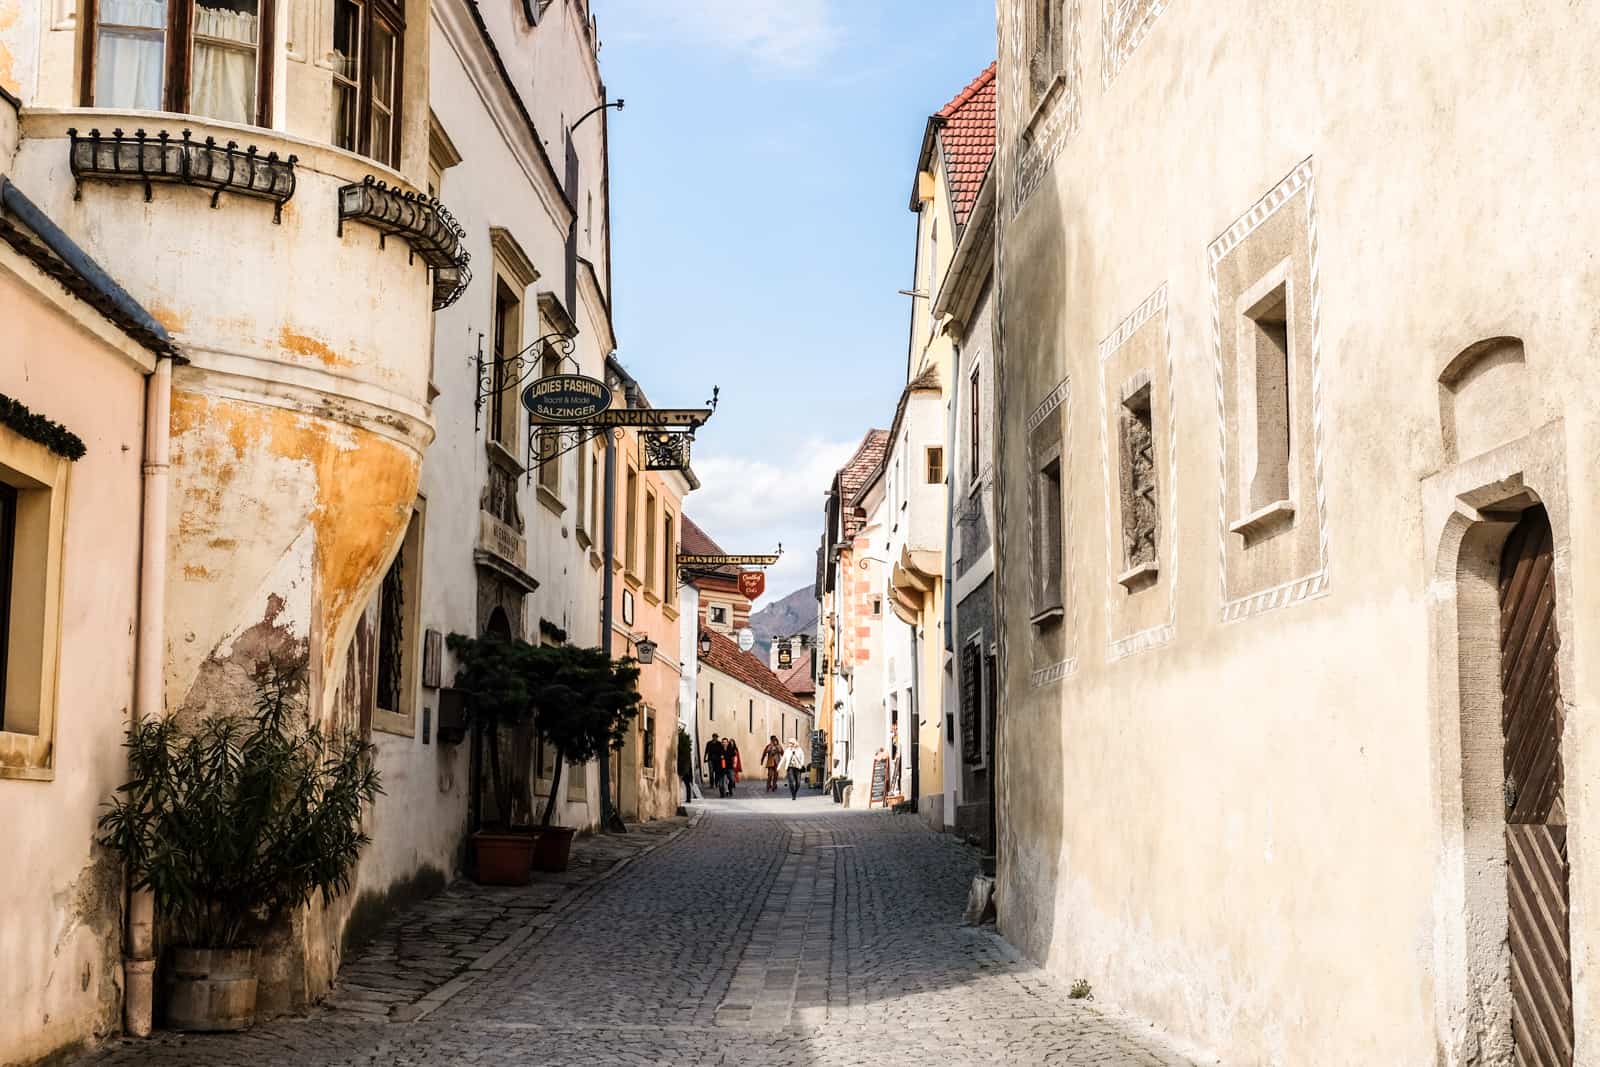 The narrow, pastel coloured Medieval and Baroque detailed village streets of Dürnstein